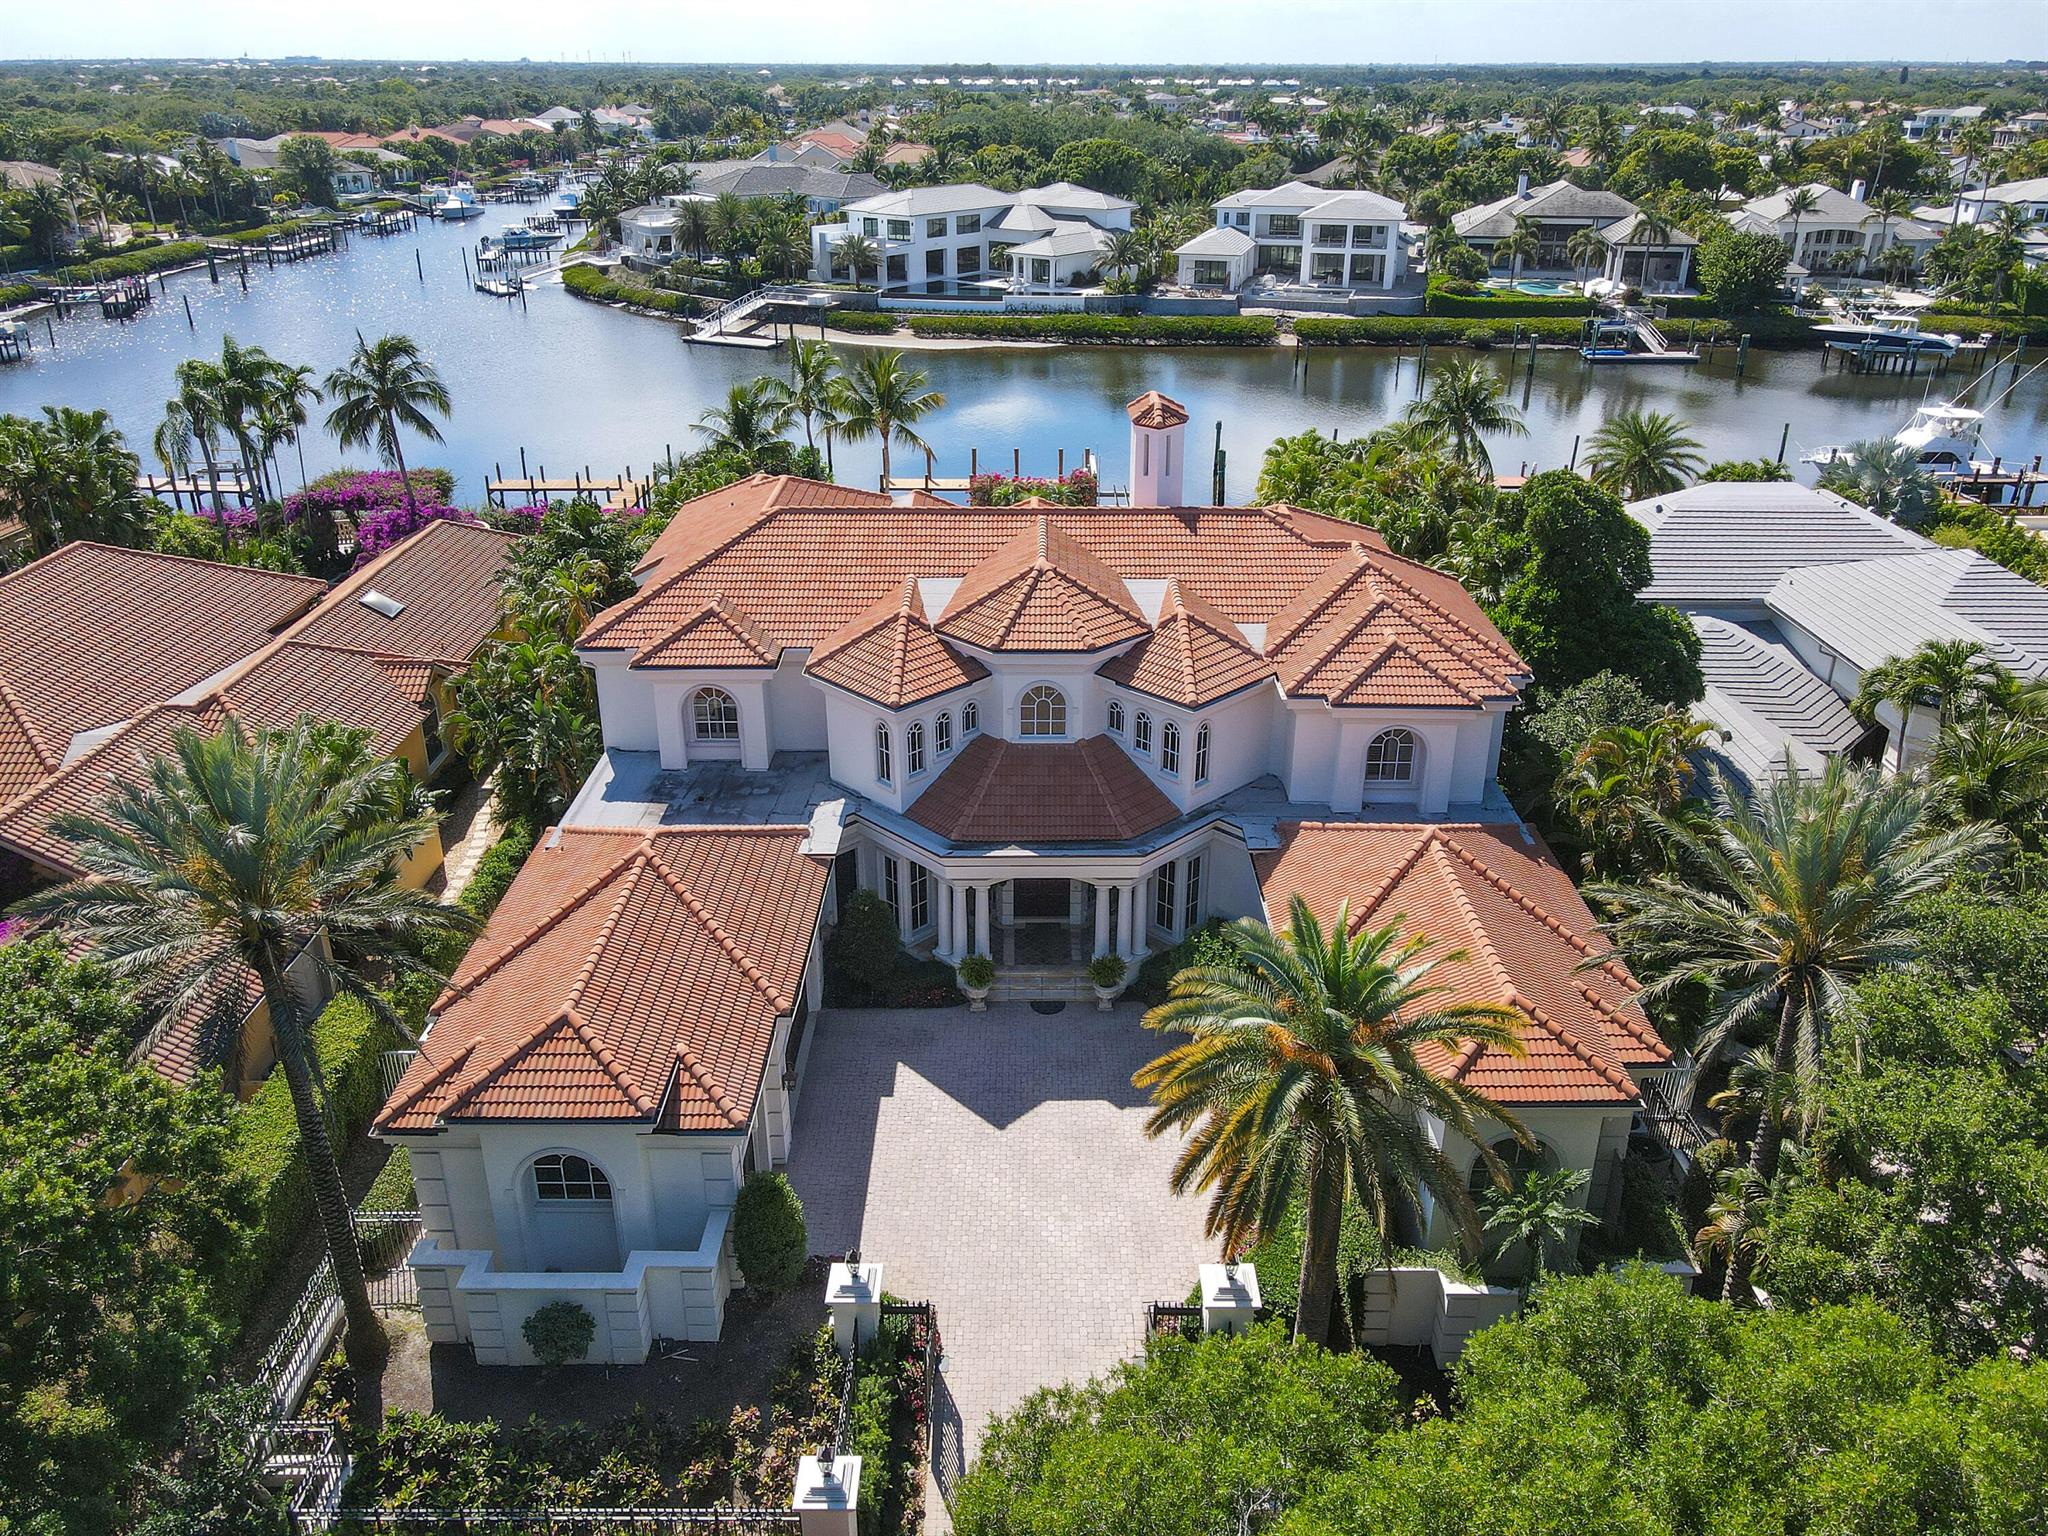 Outstanding custom estate located in the exclusive guard gated community of Admirals Cove. Sits on 110'  of water frontage with no fixed bridges. This timeless masterpiece features 5 BR/5.1BA + office, 9,101 Sg Ft soaring ceilings and spectacular water views from almost every room. Luxurious master suite with large sitting room, his & hers baths and walk-in closets. Gourmet kitchen. Step outside to be greeted by a  resort styled back yard with large pool & spa, lush landscaping. Brand new summer kitchen makes it perfect for entertaining and enjoying the beautiful sunsets and tranquil water views.FURNITURE INCLUDED.  Amenities: 45 holes of golf, 5 restaurants, 58 slip marina with floating docks, Yacht Club, Har Tru tennis courts, pickelball courts, and state of the art gym.